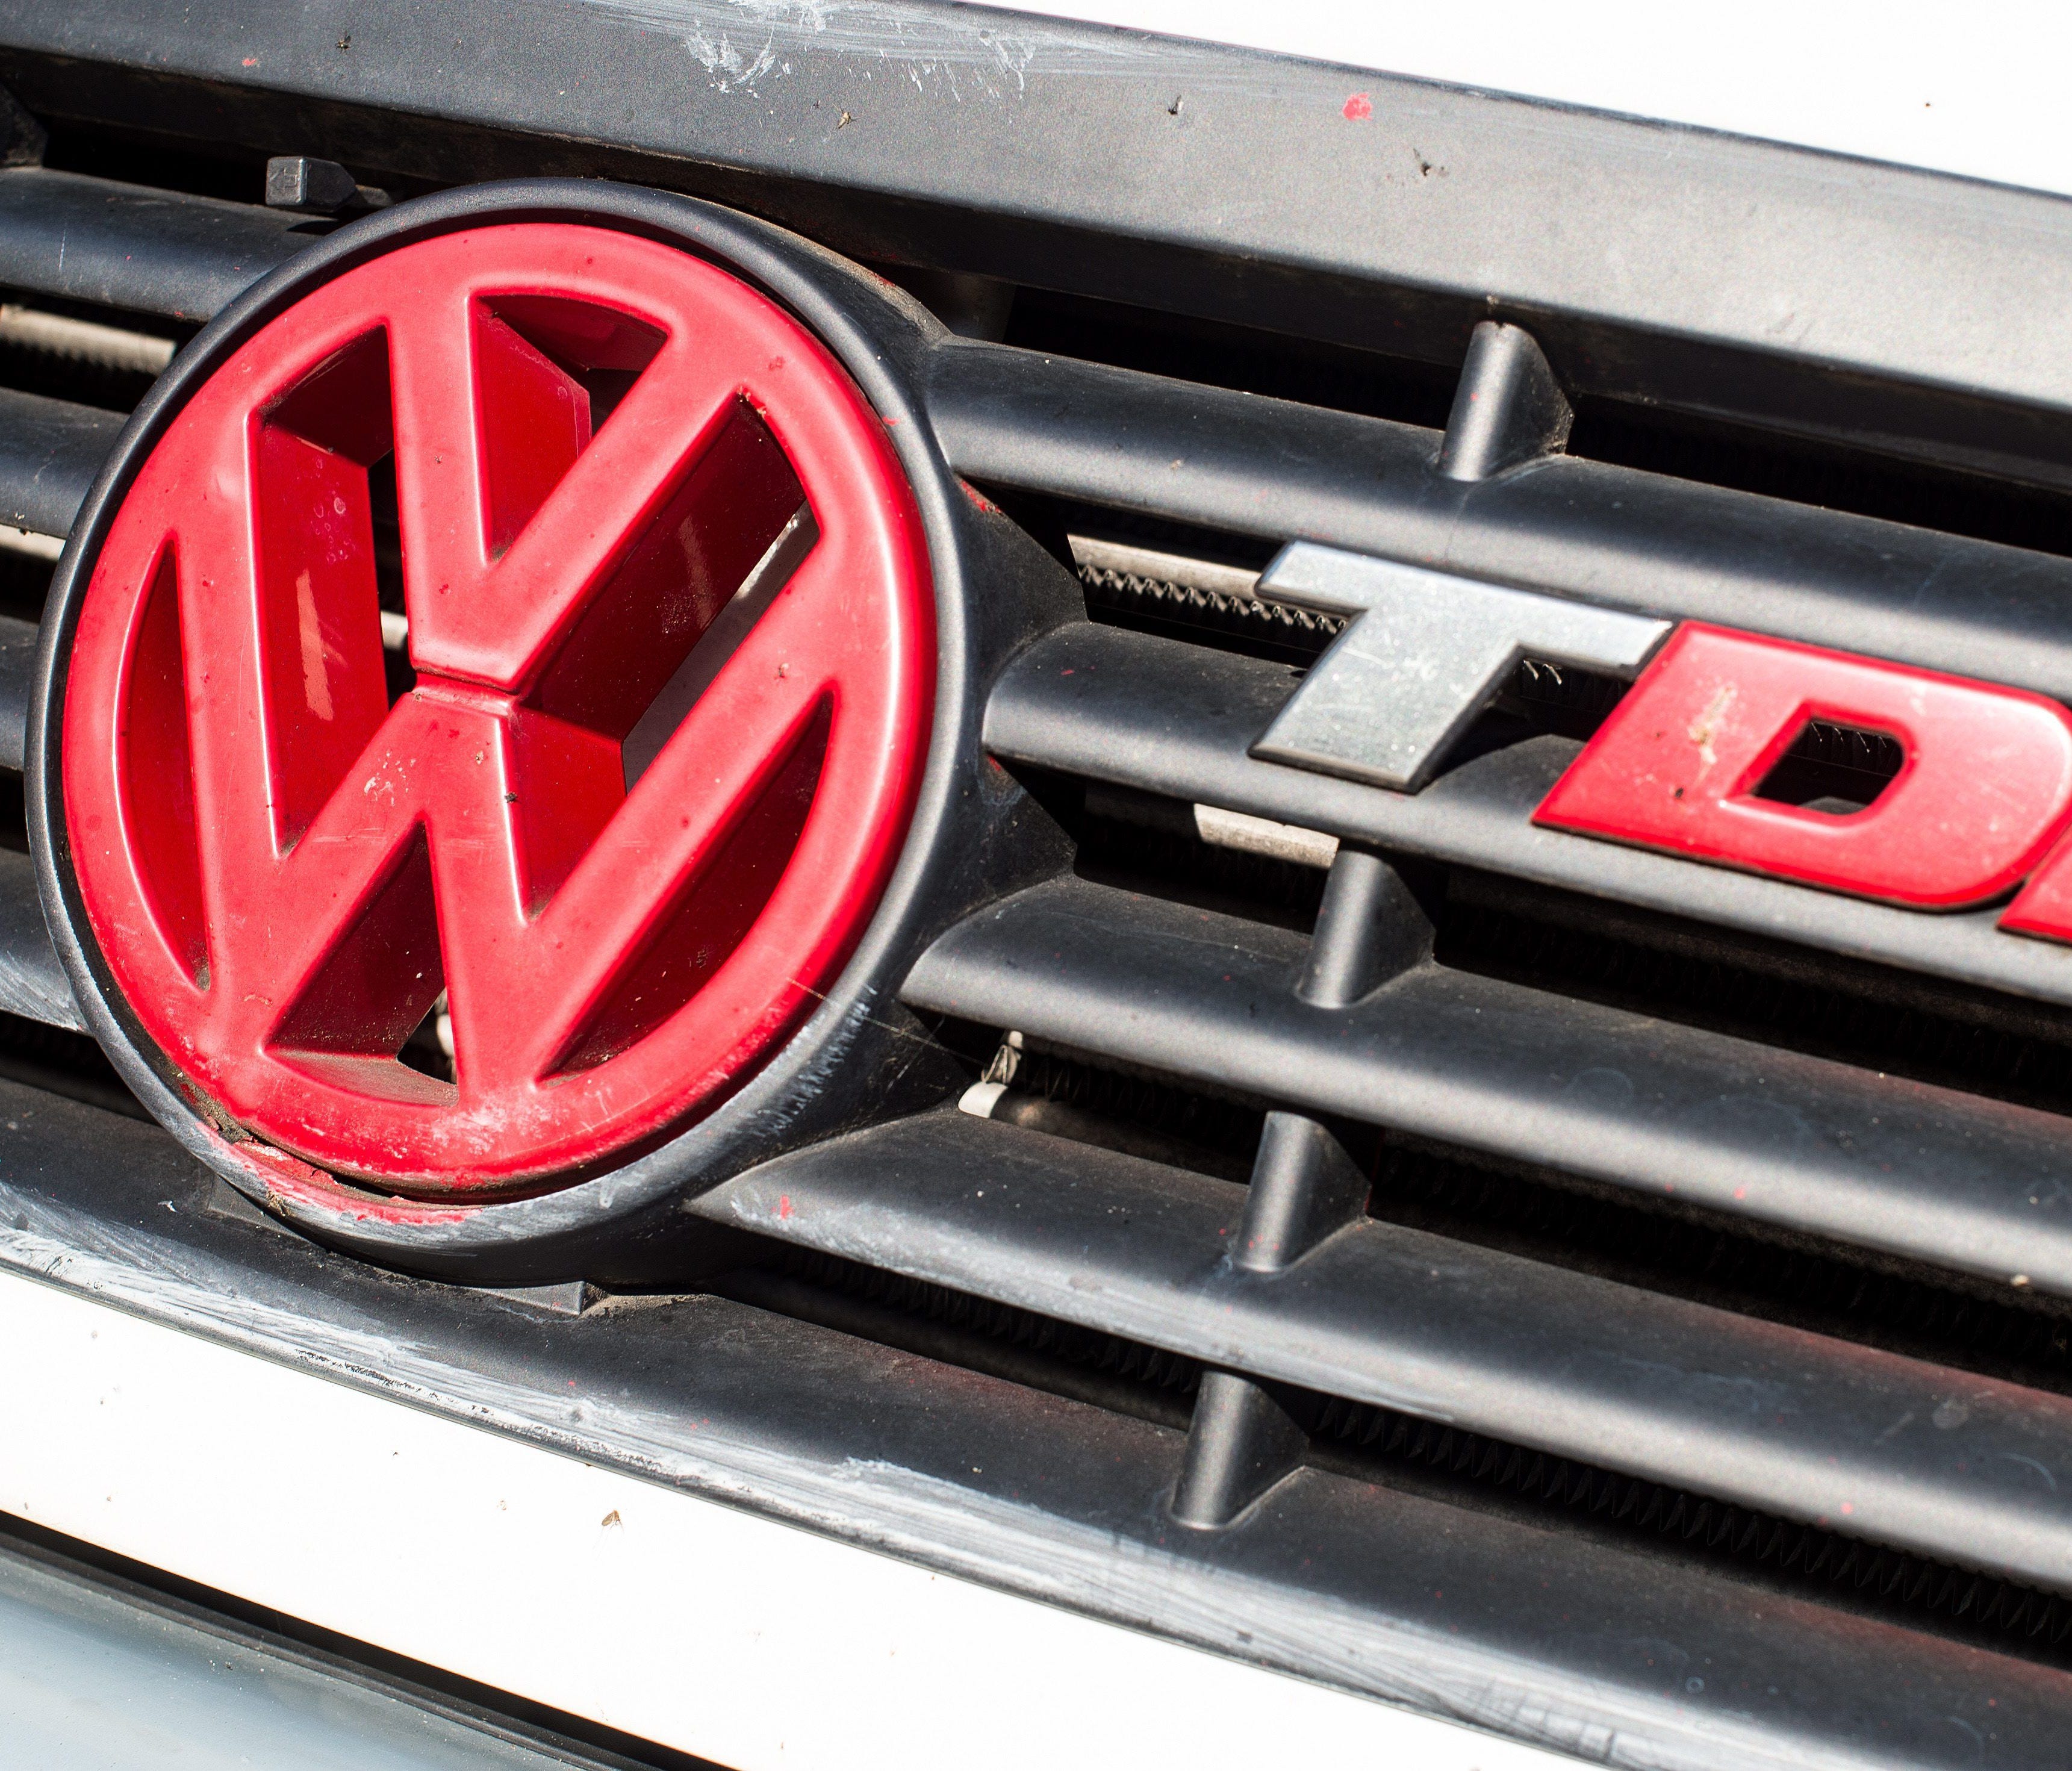 A red Volkswagen logo on a diesel-powered vehicle next to the abbreviation TDI (Turbocharged direct injection) in Frankfurt